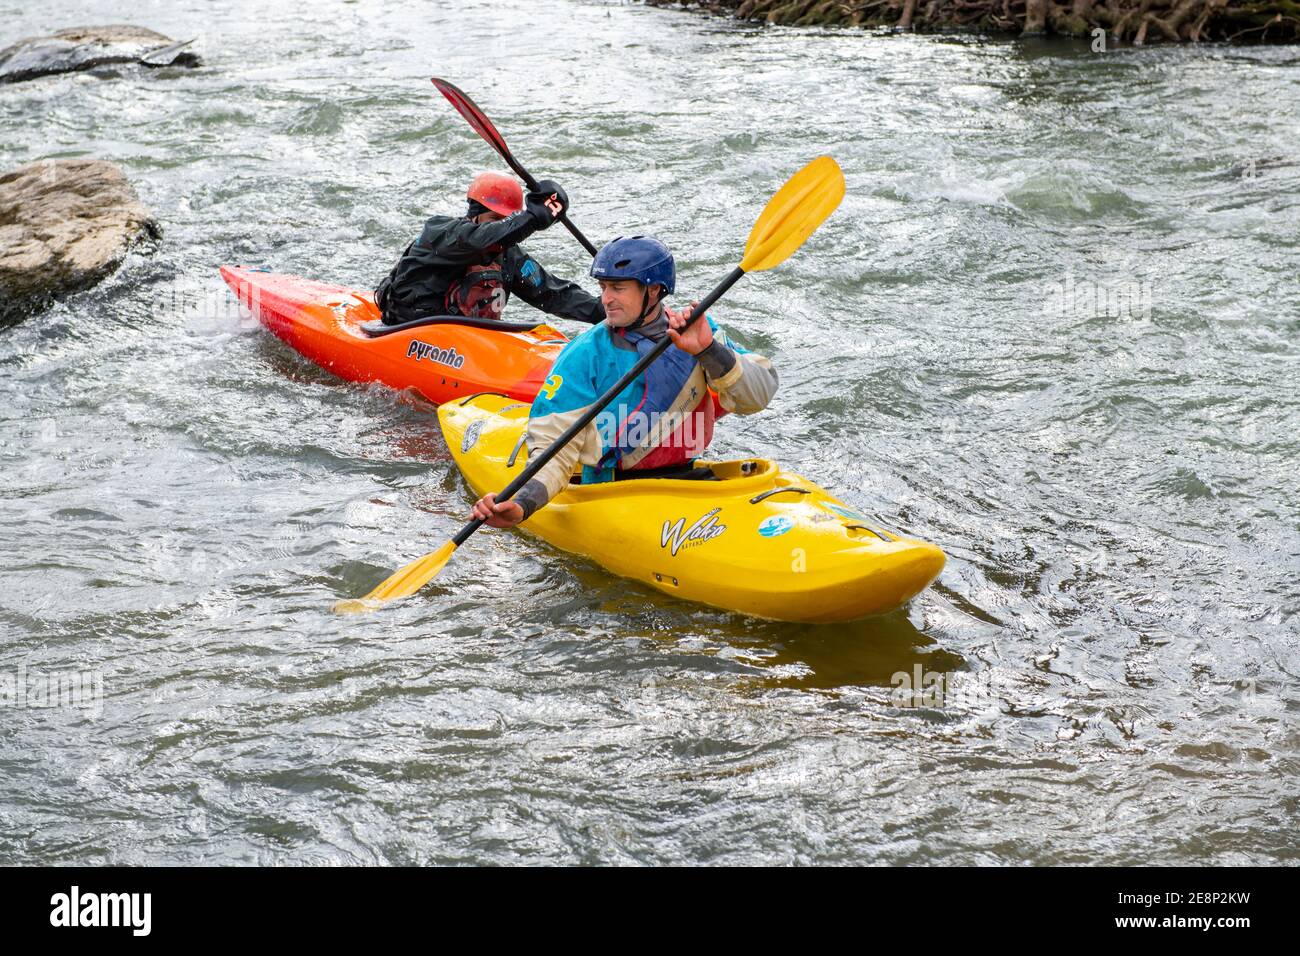 USA Maryland MD kayak sul fiume Potomac vicino a Darnstown uomini divertimento invernale Foto Stock